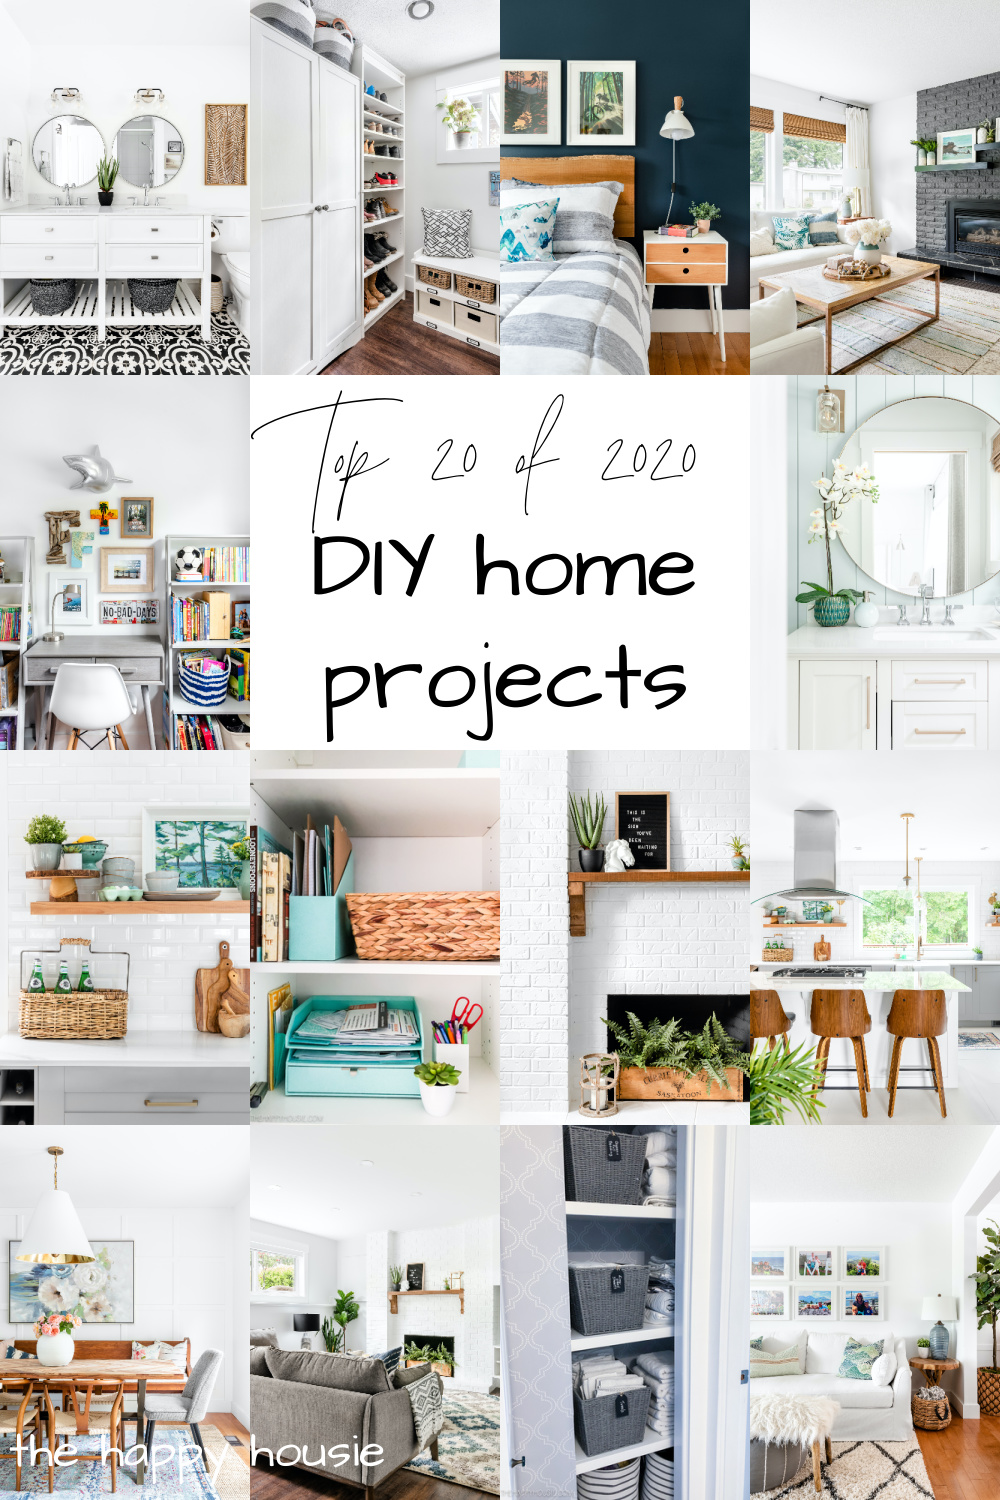 Top 20 of 2020 DIY Home Projects poster.